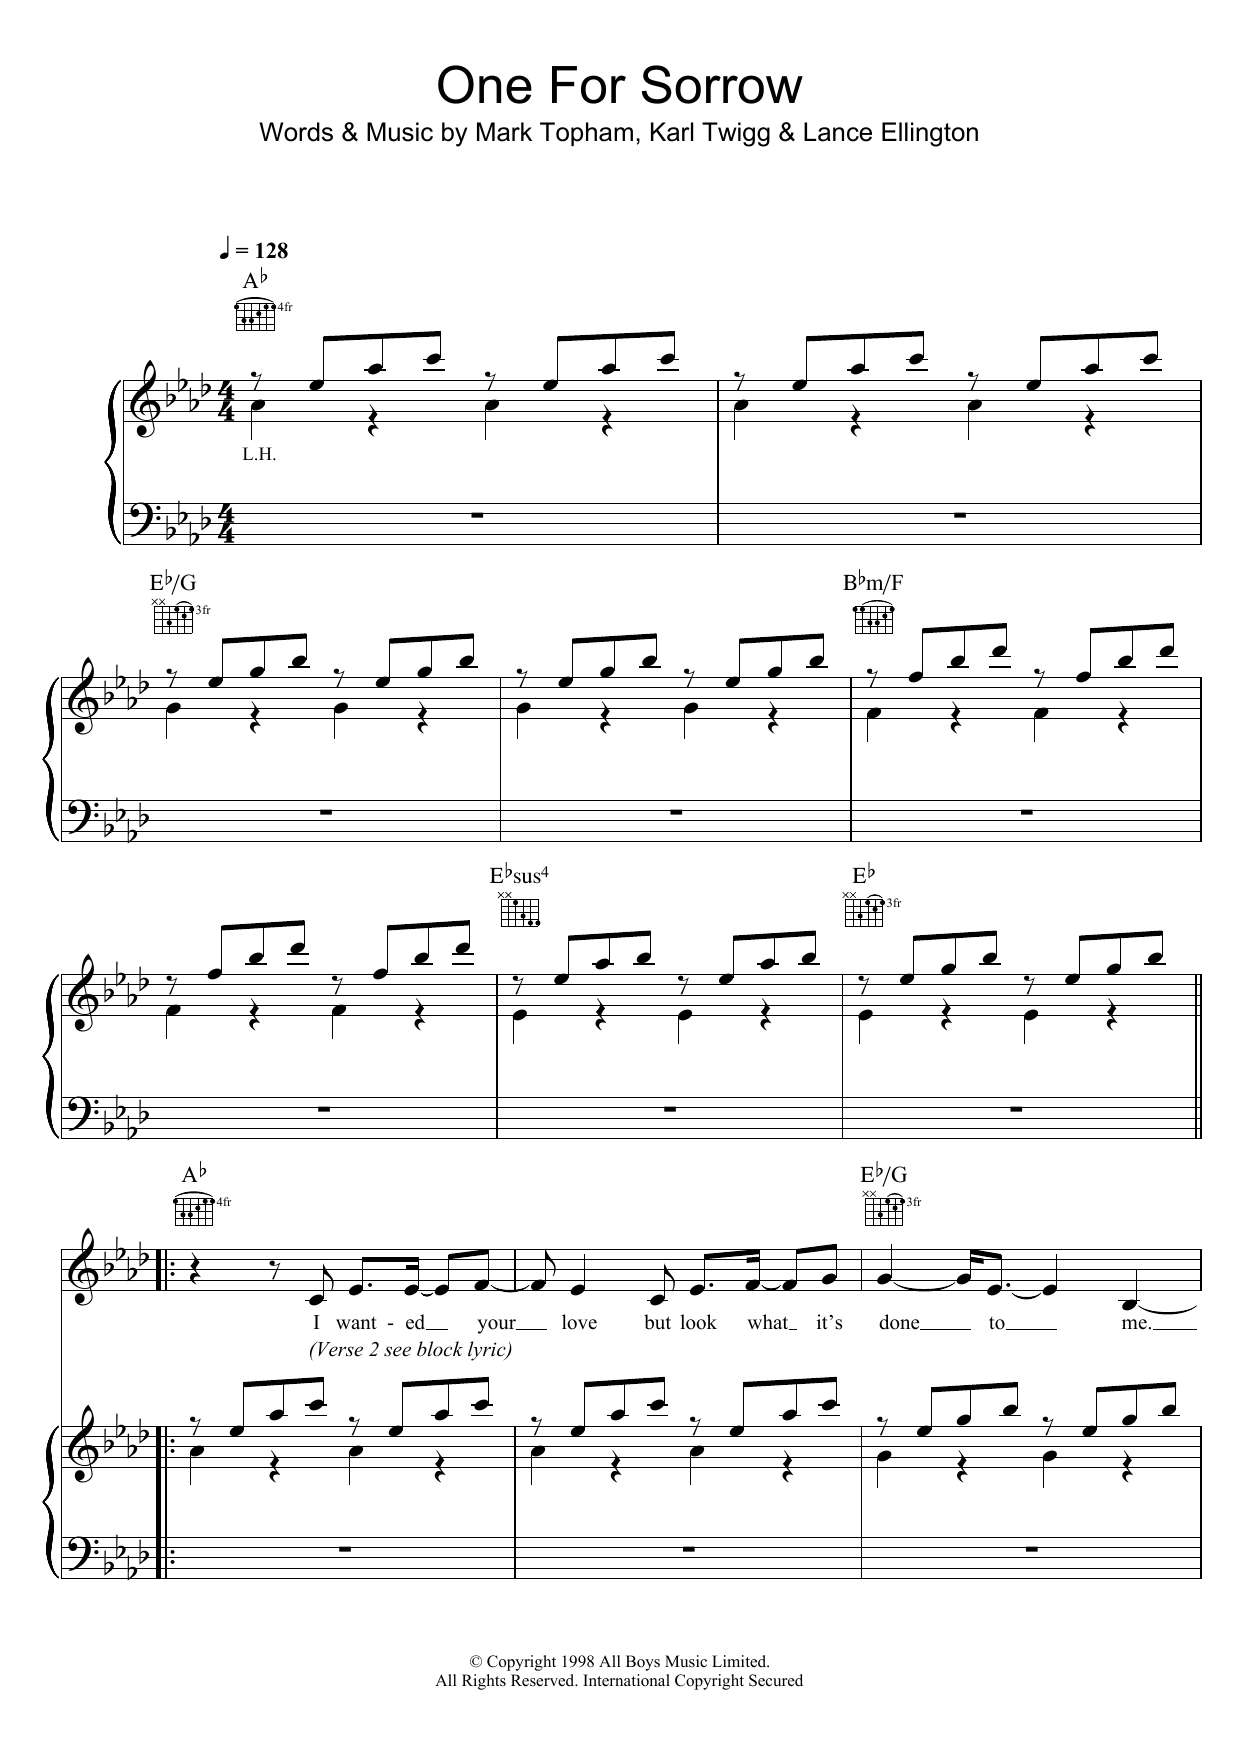 Download Steps One For Sorrow Sheet Music